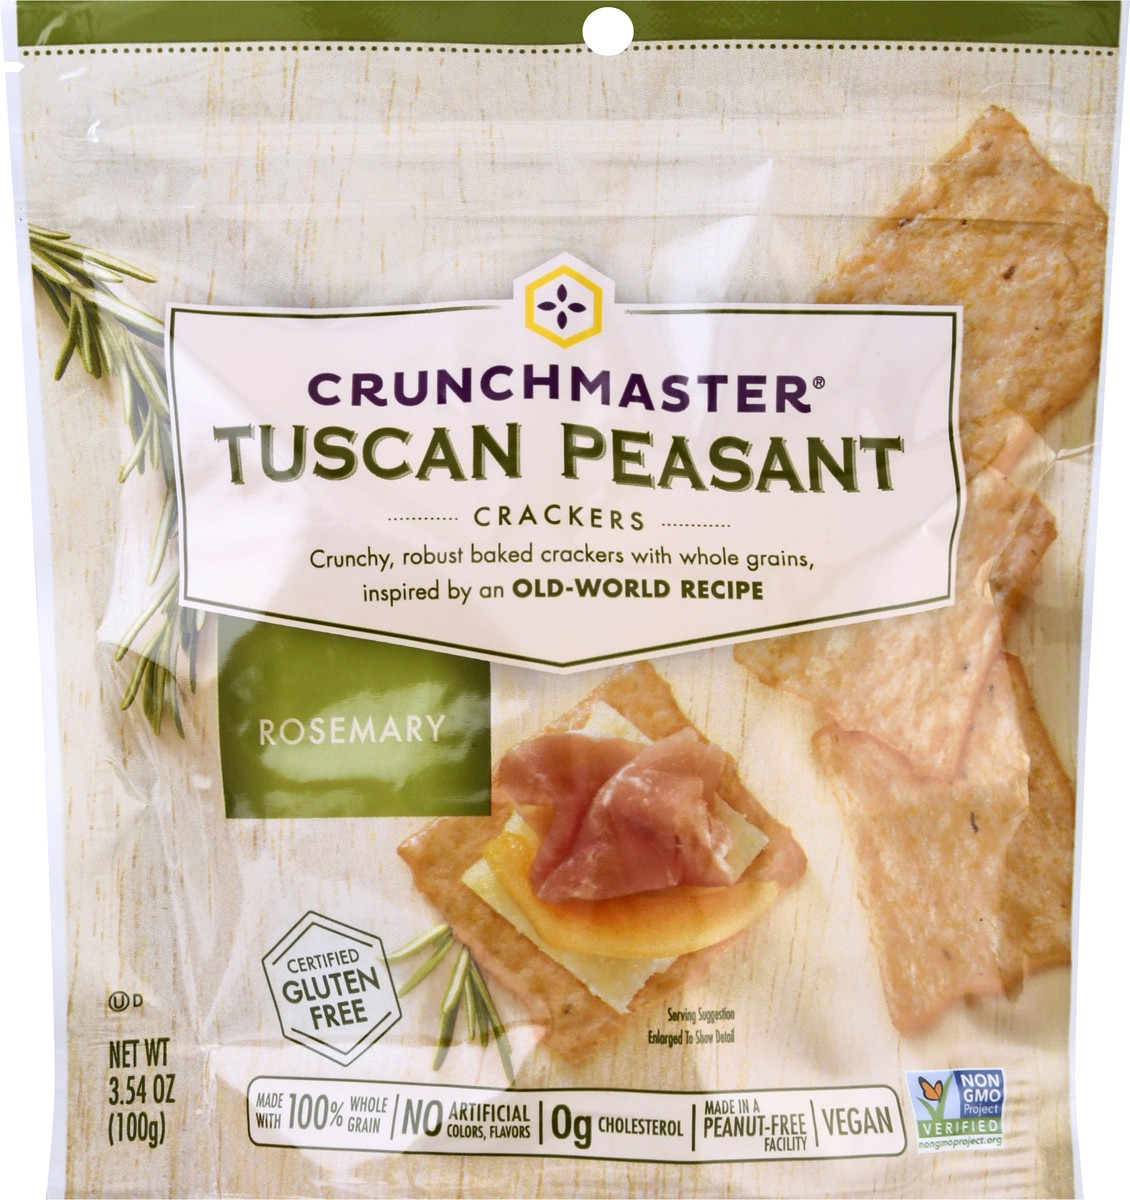 slide 9 of 10, Crunchmaster Tuscan Peasant Crackers Rosemary, 3.5 oz